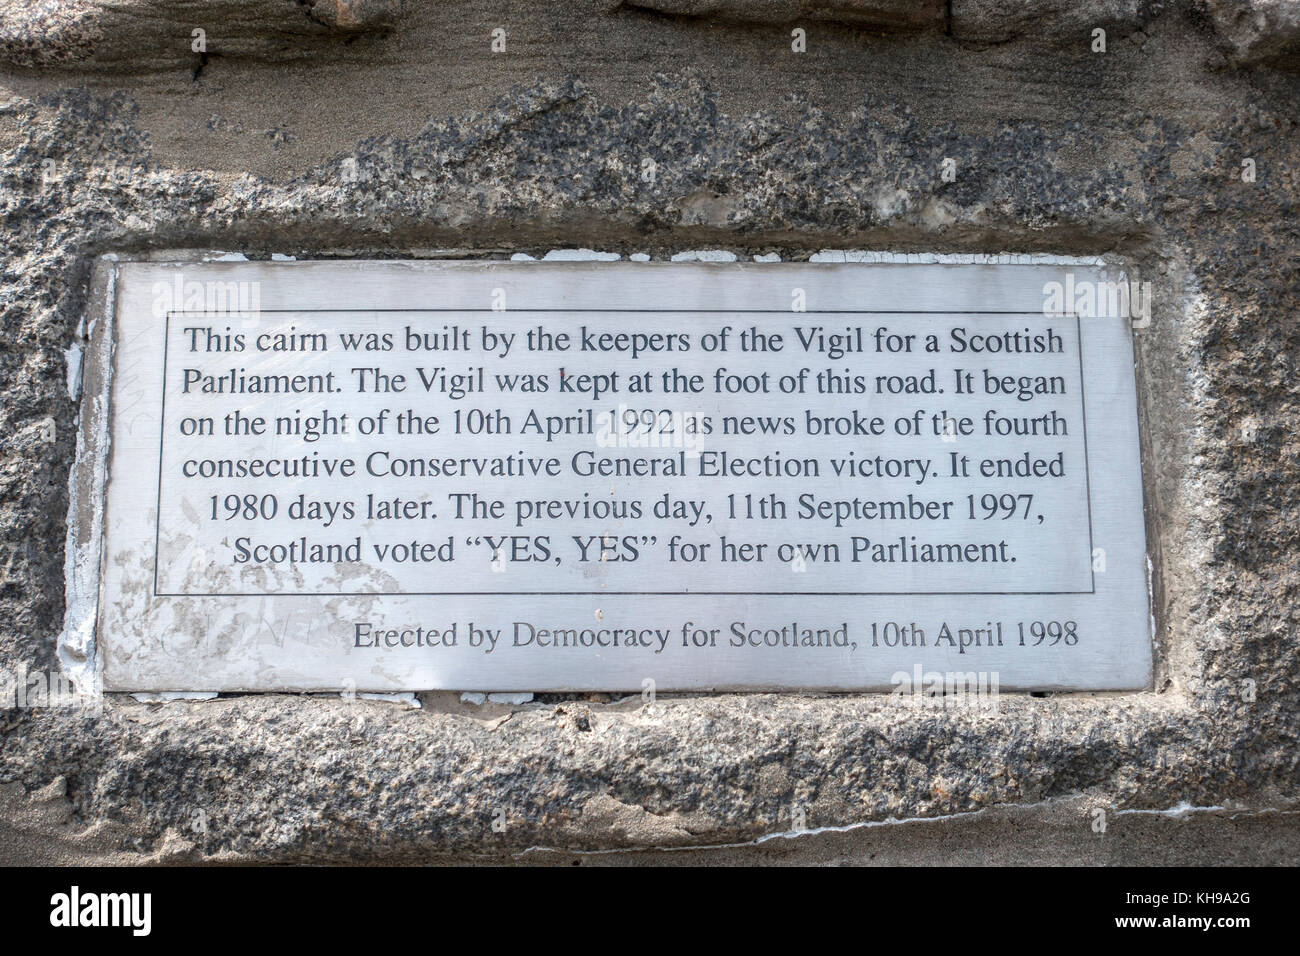 The Description Of The Cairn On Calton Hill Edinburgh Scotland, Built By The Democracy For Scotland Movement Ce;lebrating The Yes Vote For A Scottish  Stock Photo